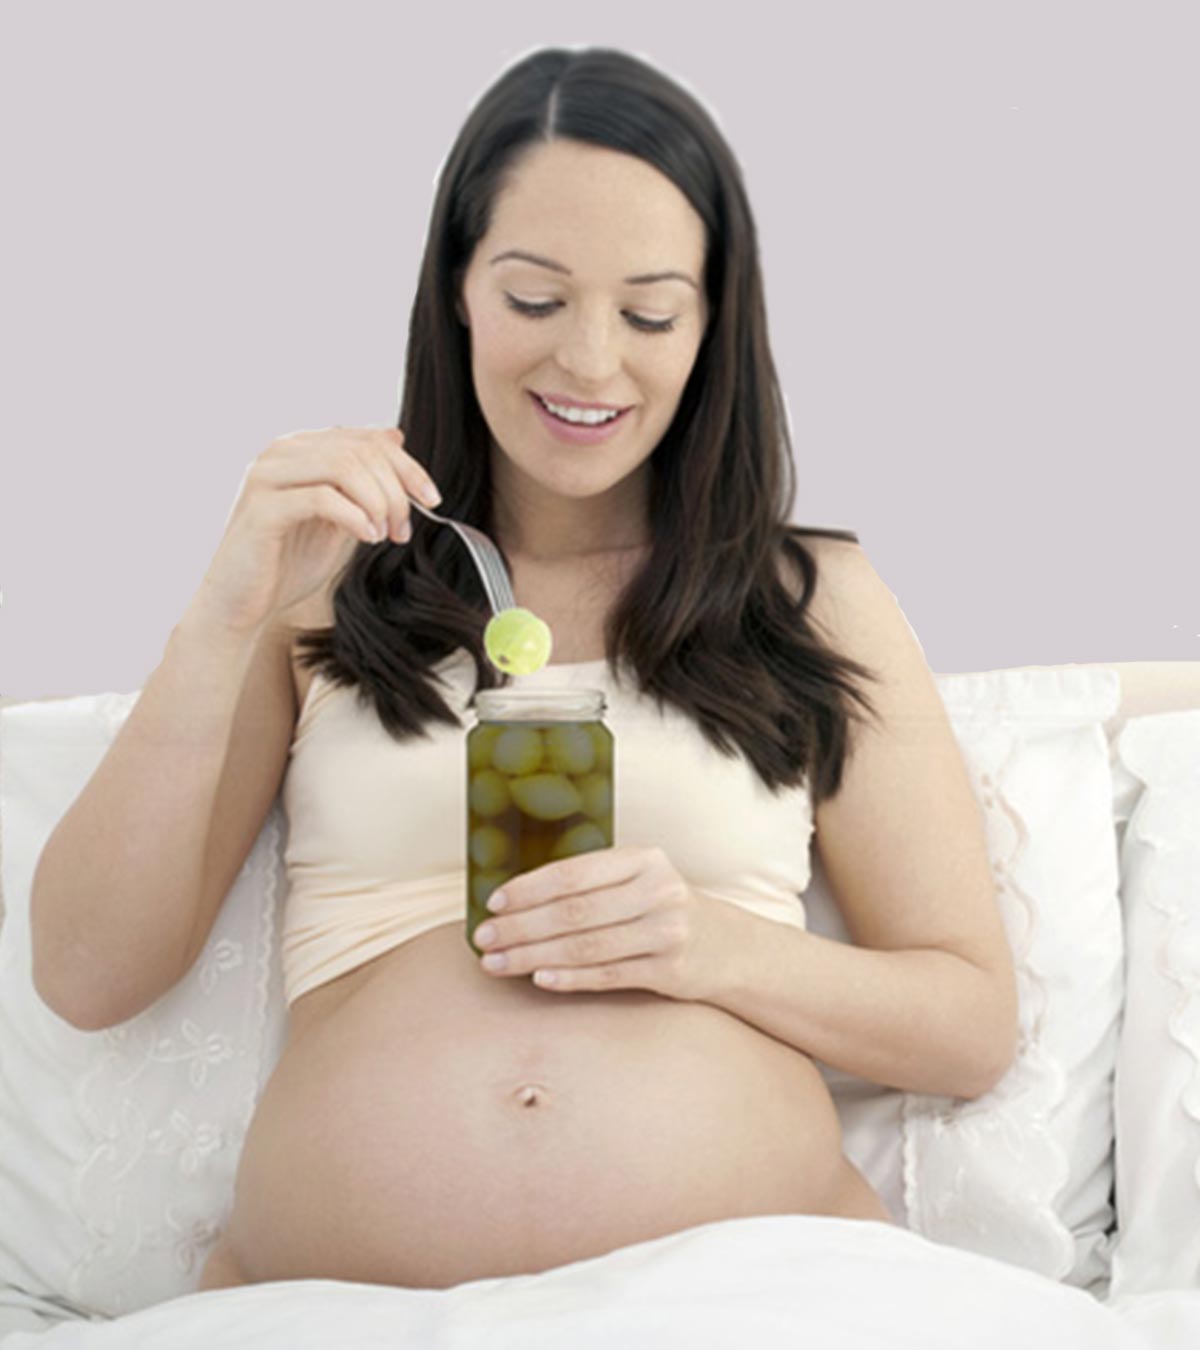 13Benefits Of Eating Amla (Indian Gooseberry) During Pregnancy